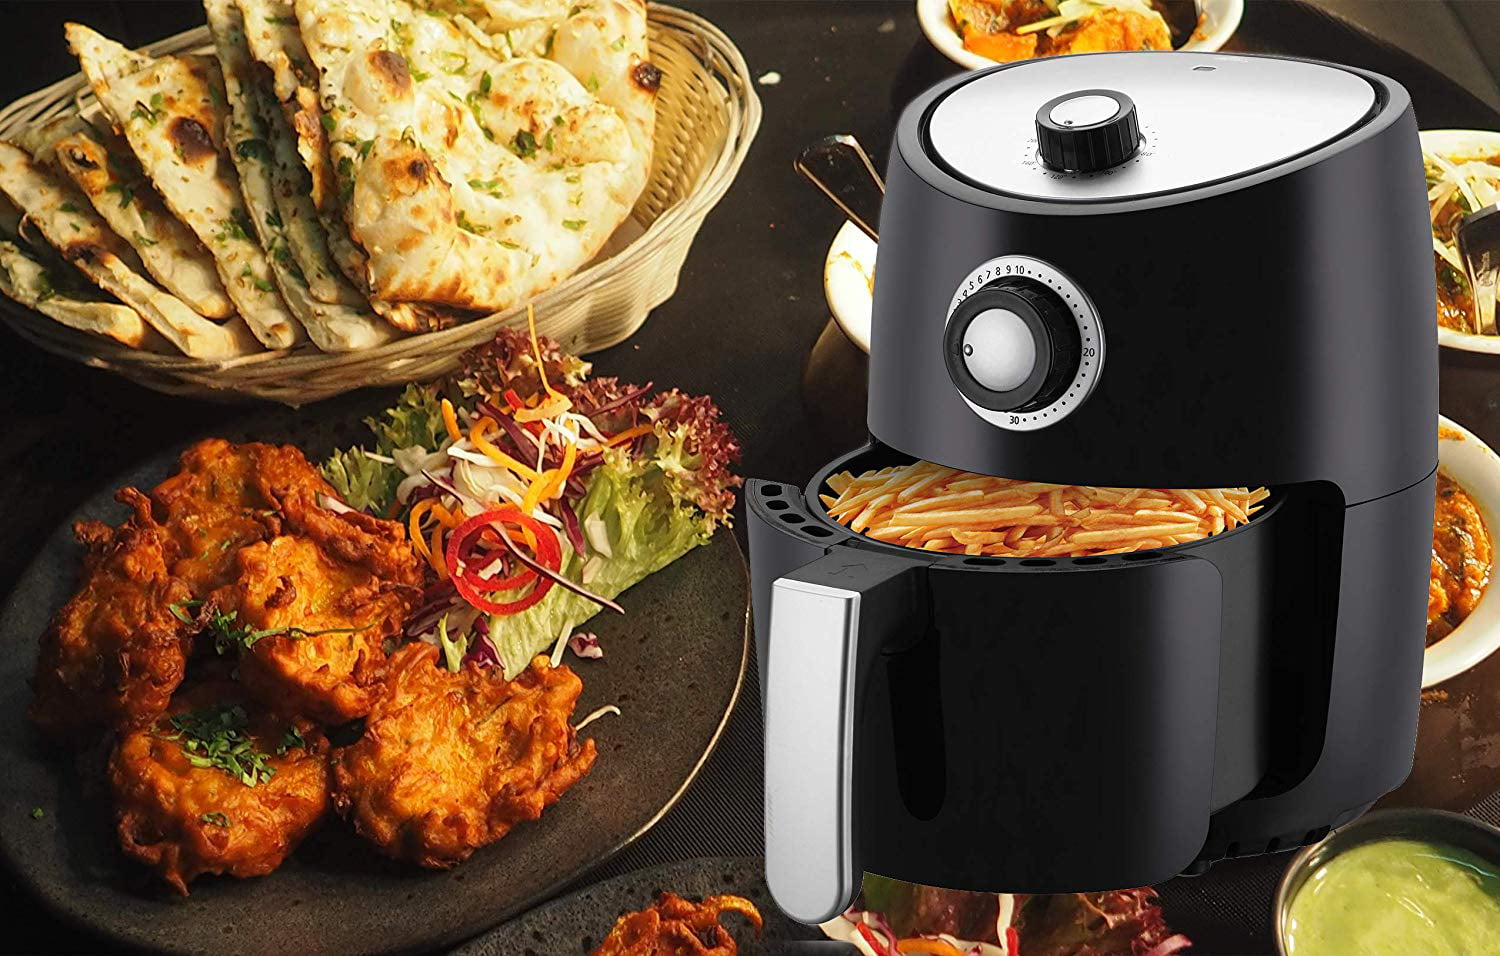 SM-AIR-1811 Emerald Air Fryer 4.0 Liter Capacity with Rapid Air Technology,  Slide Out Basket & Pan 1400 Watts (1811)